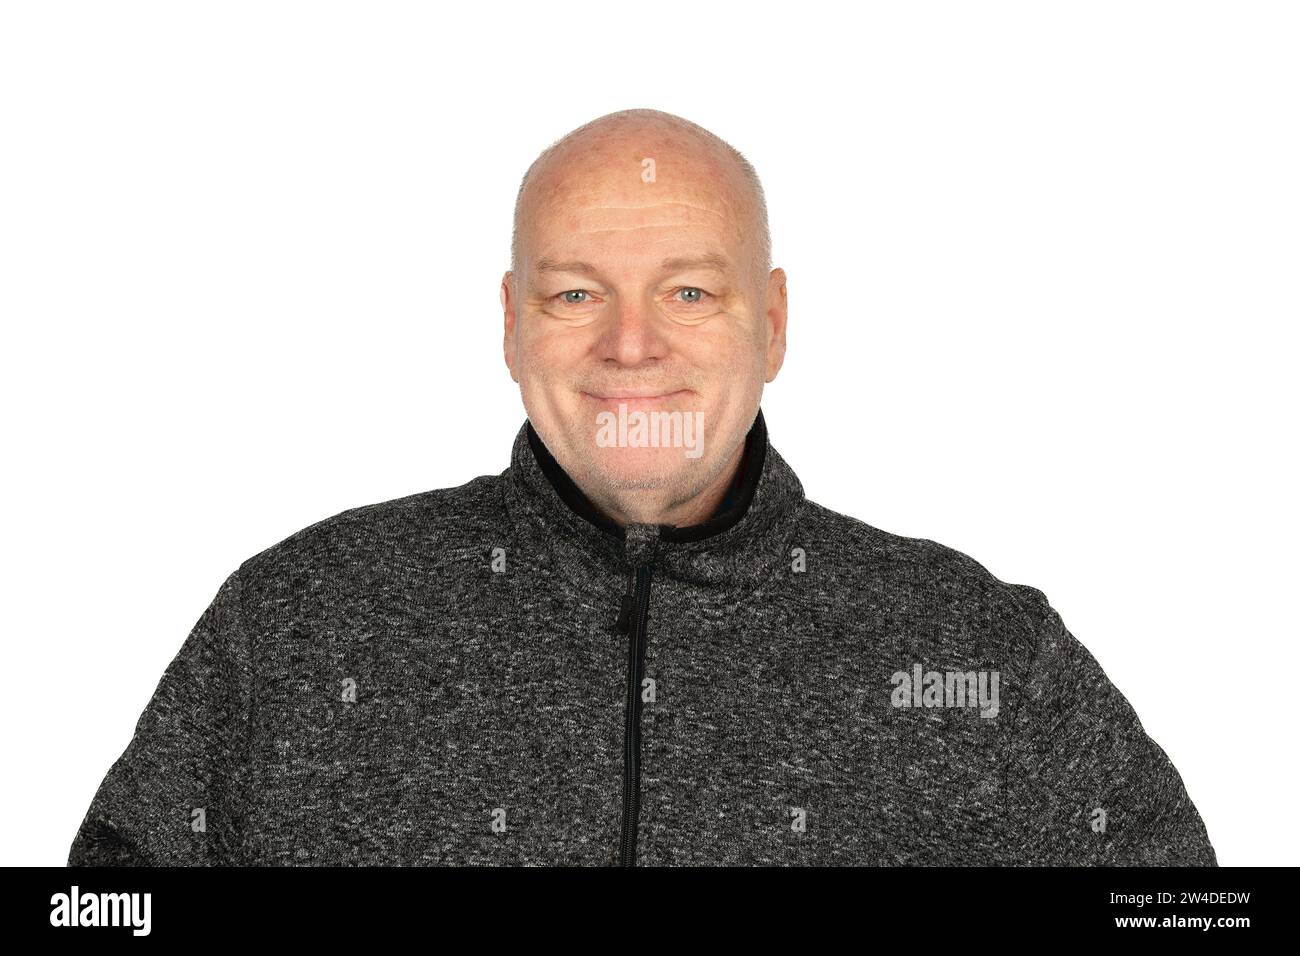 Smiling 58-Year-Old Caucasian Man in Grey Sweater Jacket Portrait Stock Photo